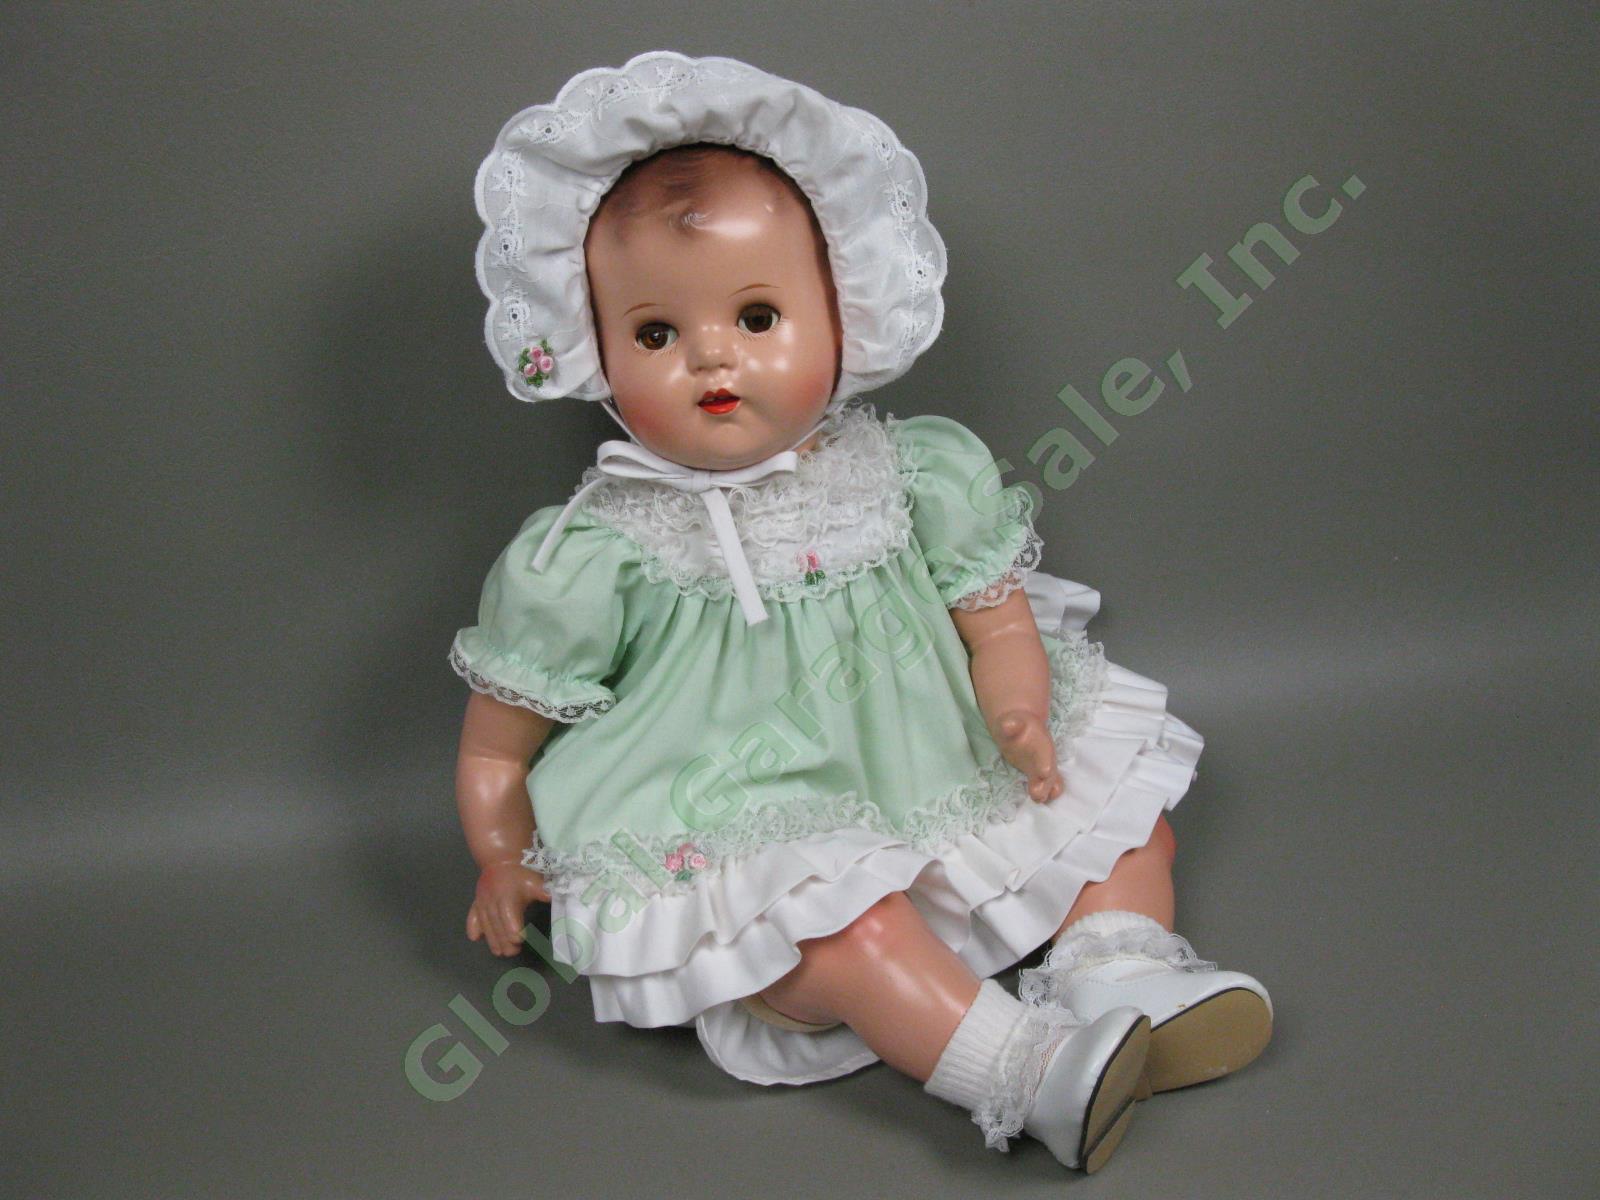 Vintage c1940s Ideal 20" Baby Beautiful Composition + Cloth Doll Fully Restored